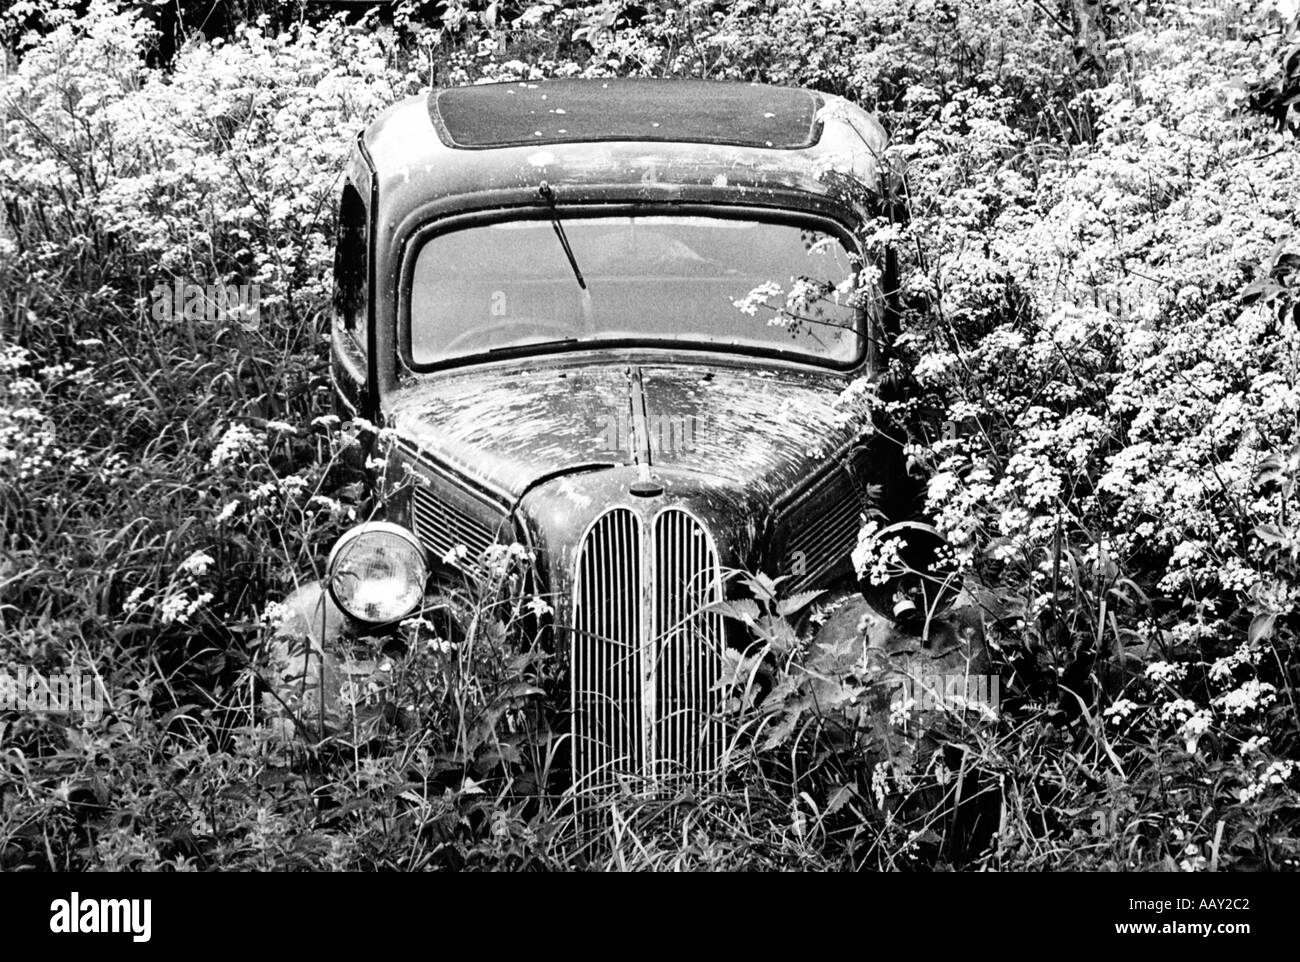 An old Ford car lies rusting amongst the cow parsley at an orchard in Broughton. Stock Photo